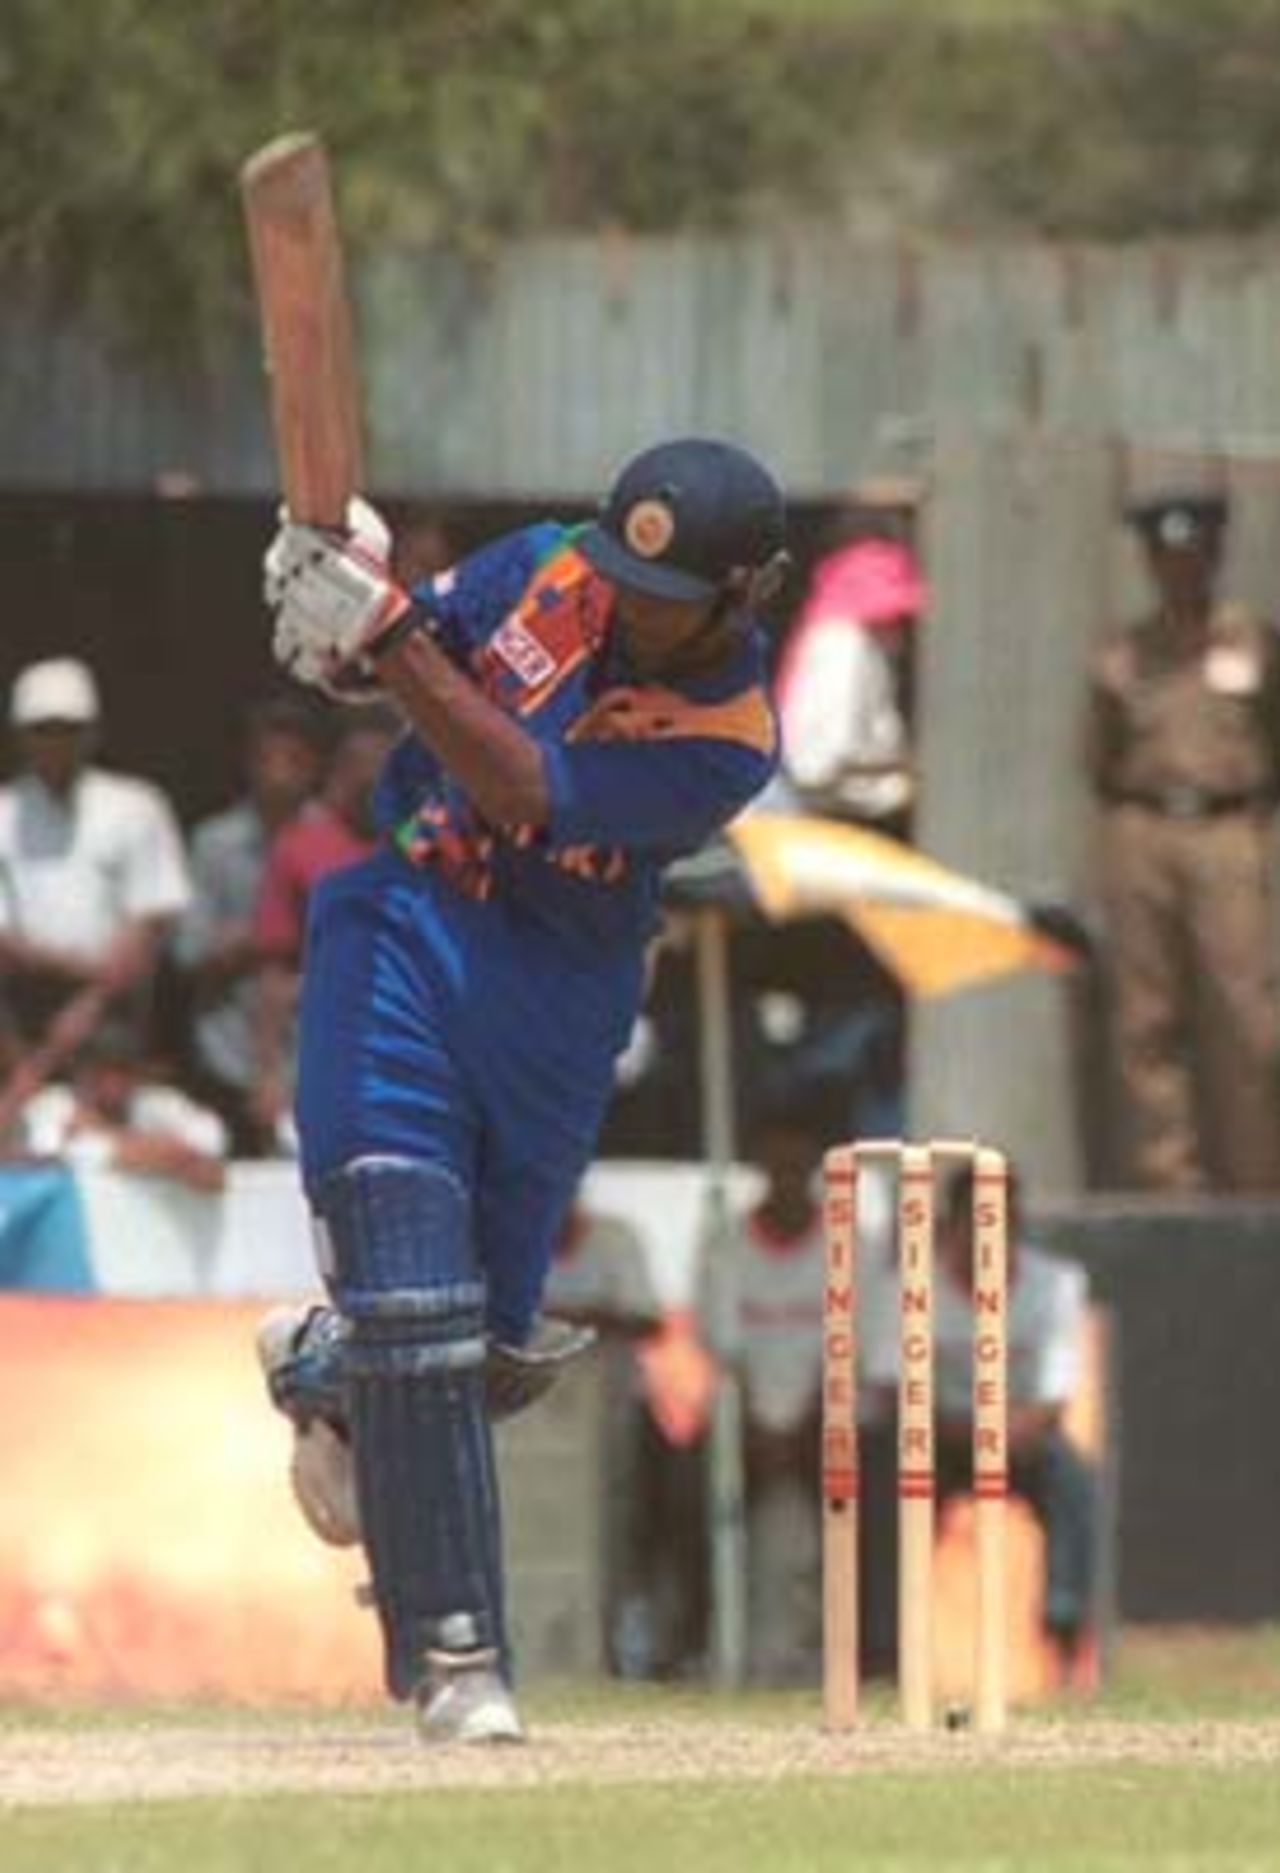 Sri Lankan batsman Russel Arnold bats during the Singer Cup Triangular limited over cricket match between Sri Lanka and South Africa in Galle international stadium in Galle Sri Lanka on Thursday, July. 6, 2000